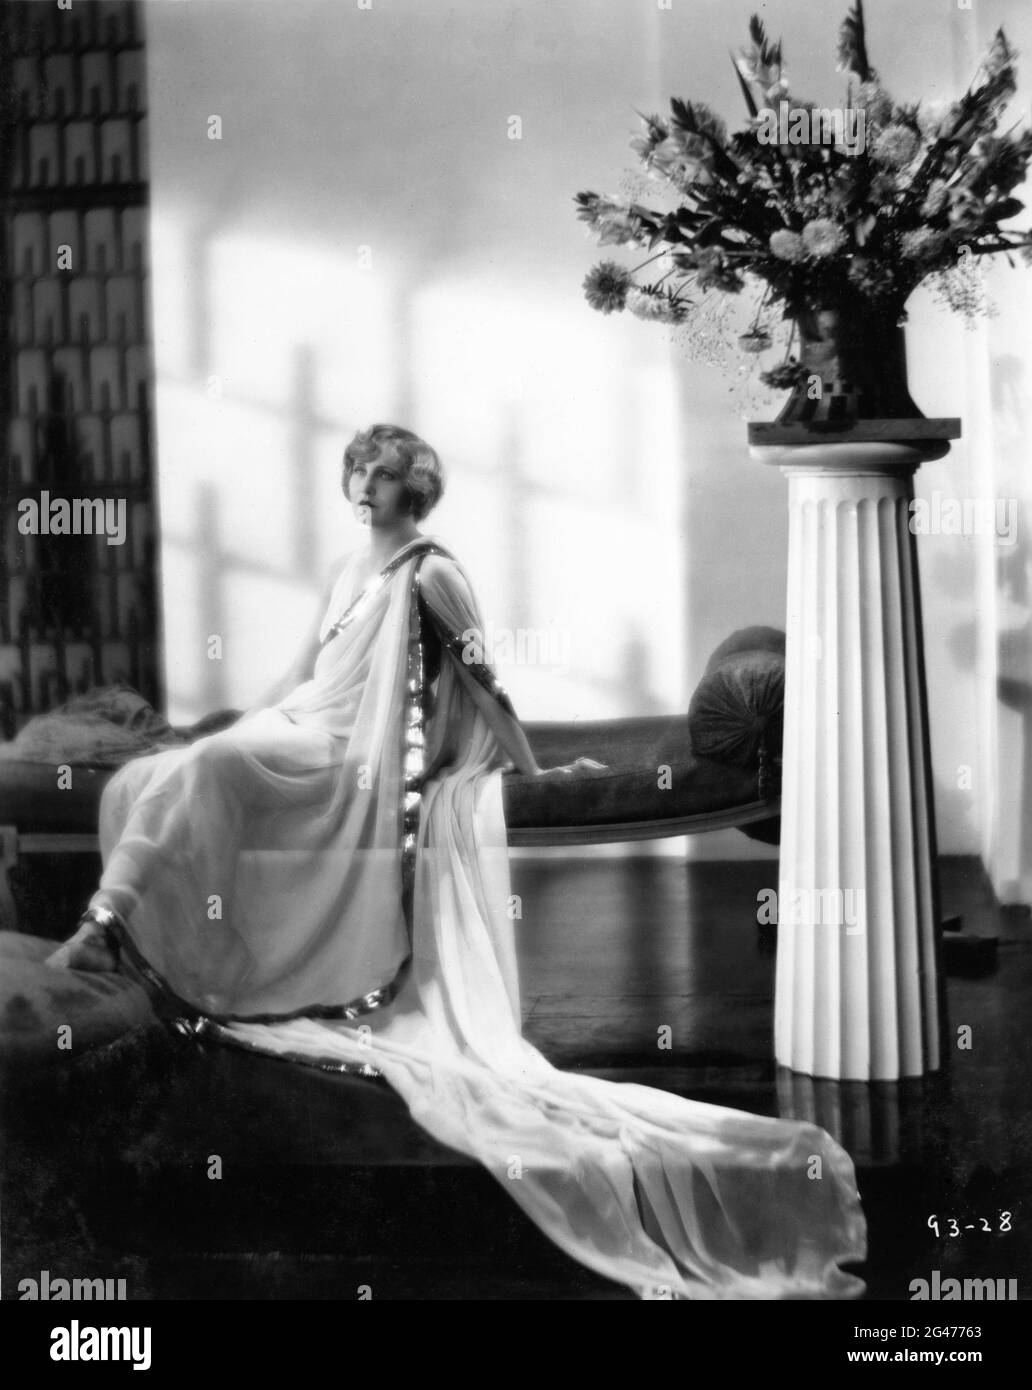 MARIA CORDA Portrait as Helen in THE PRIVATE LIFE OF HELEN OF TROY 1927 director ALEXANDER KORDA novel John Erskine play Robert E. Sherwood scenario Casey Wilson and Gerald C. Duffy costume design Max Rée First National Pictures Stock Photo